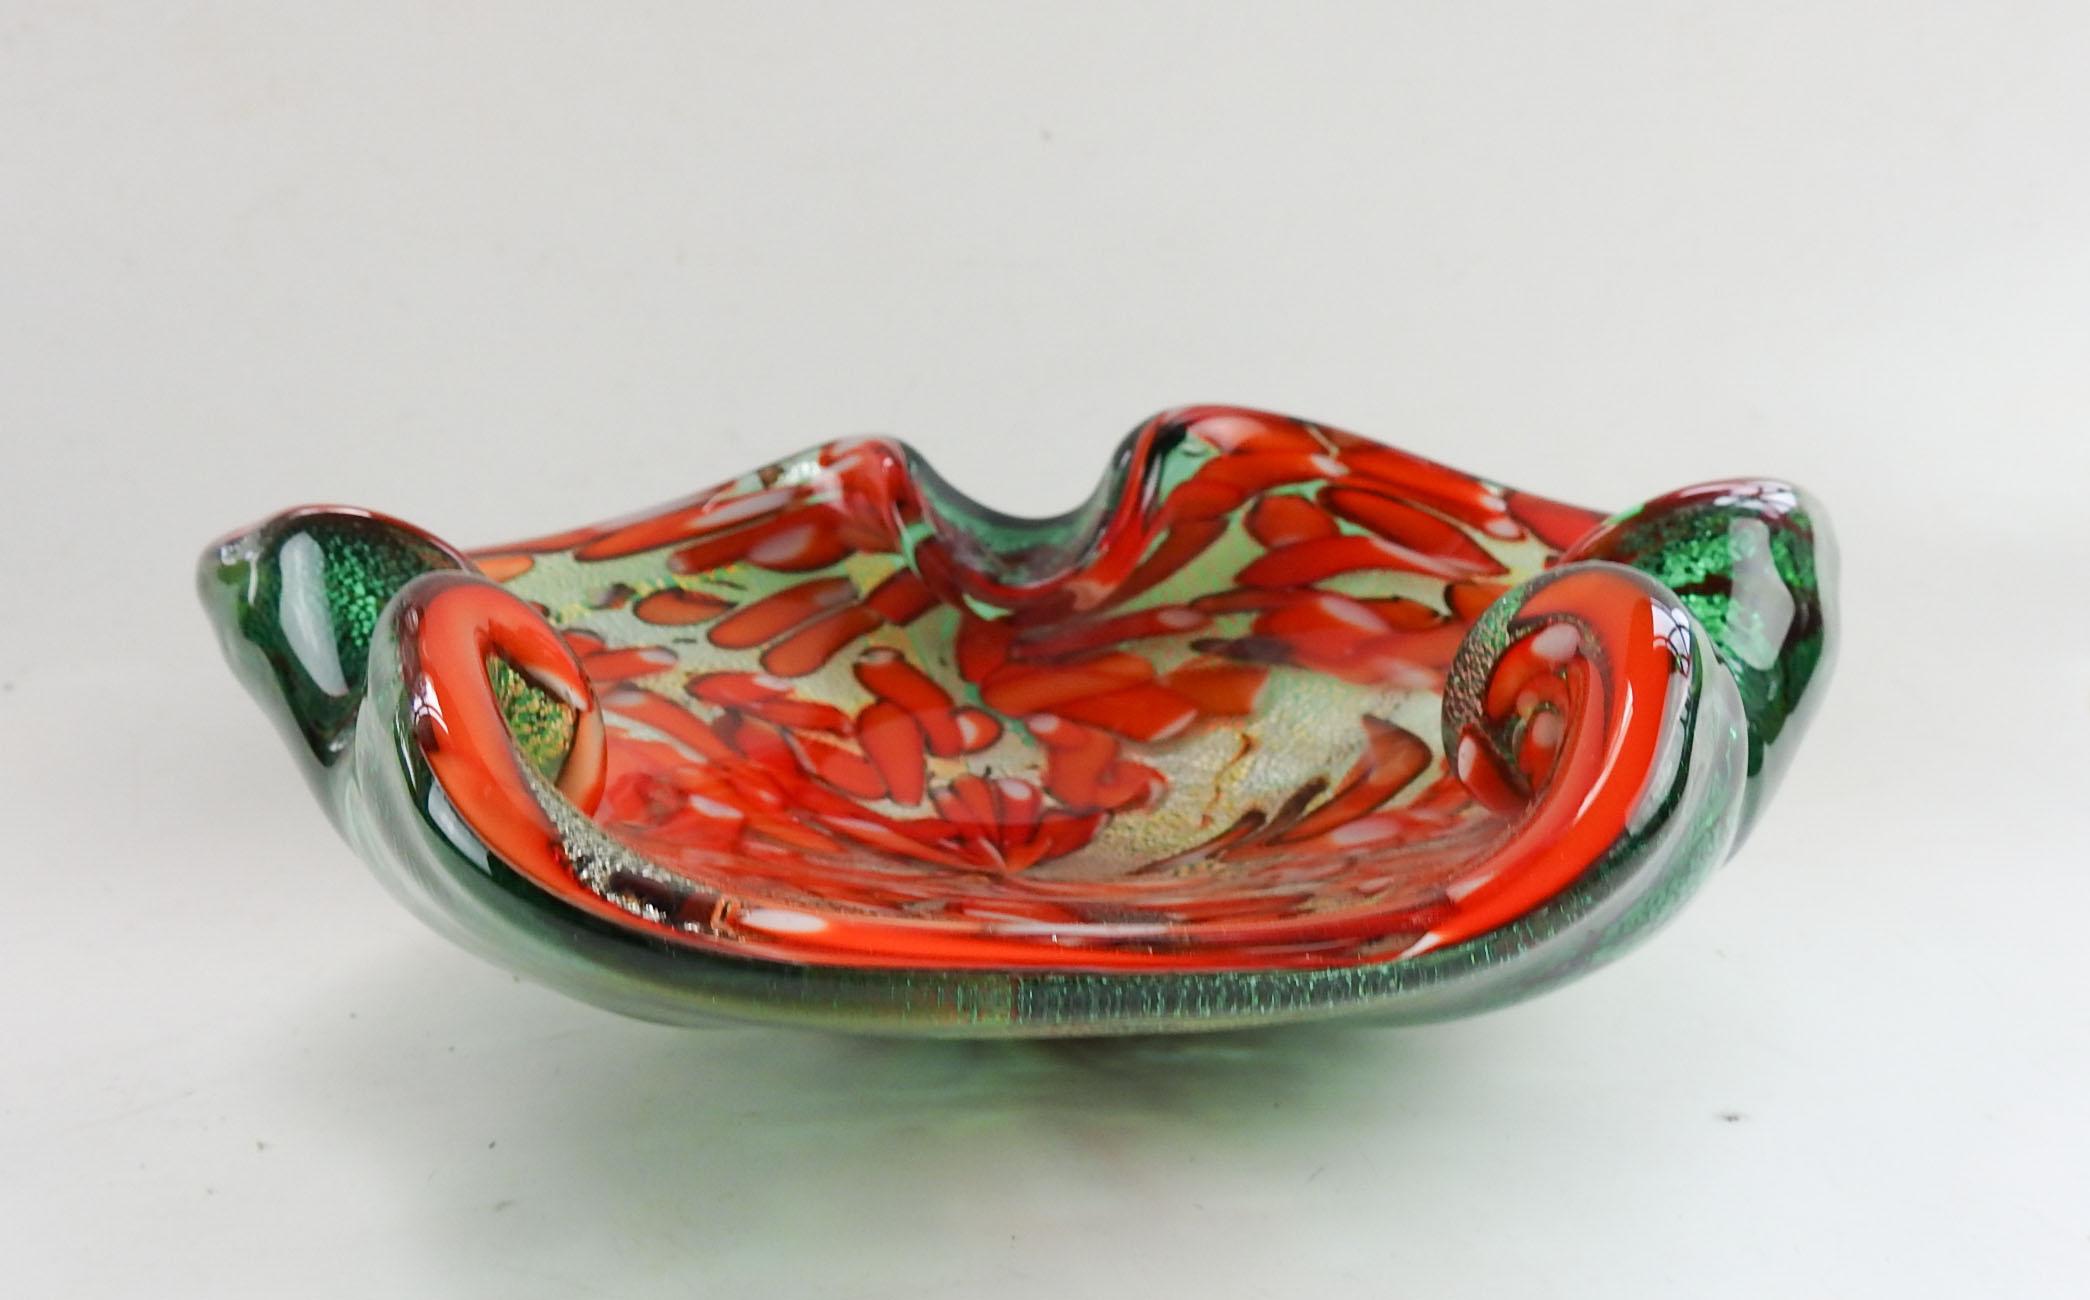 Vintage Murano glass bowl or ashtray. Green with gold leaf layer, orange and white canes. Couple tiny manufacturing bumps on bottom.